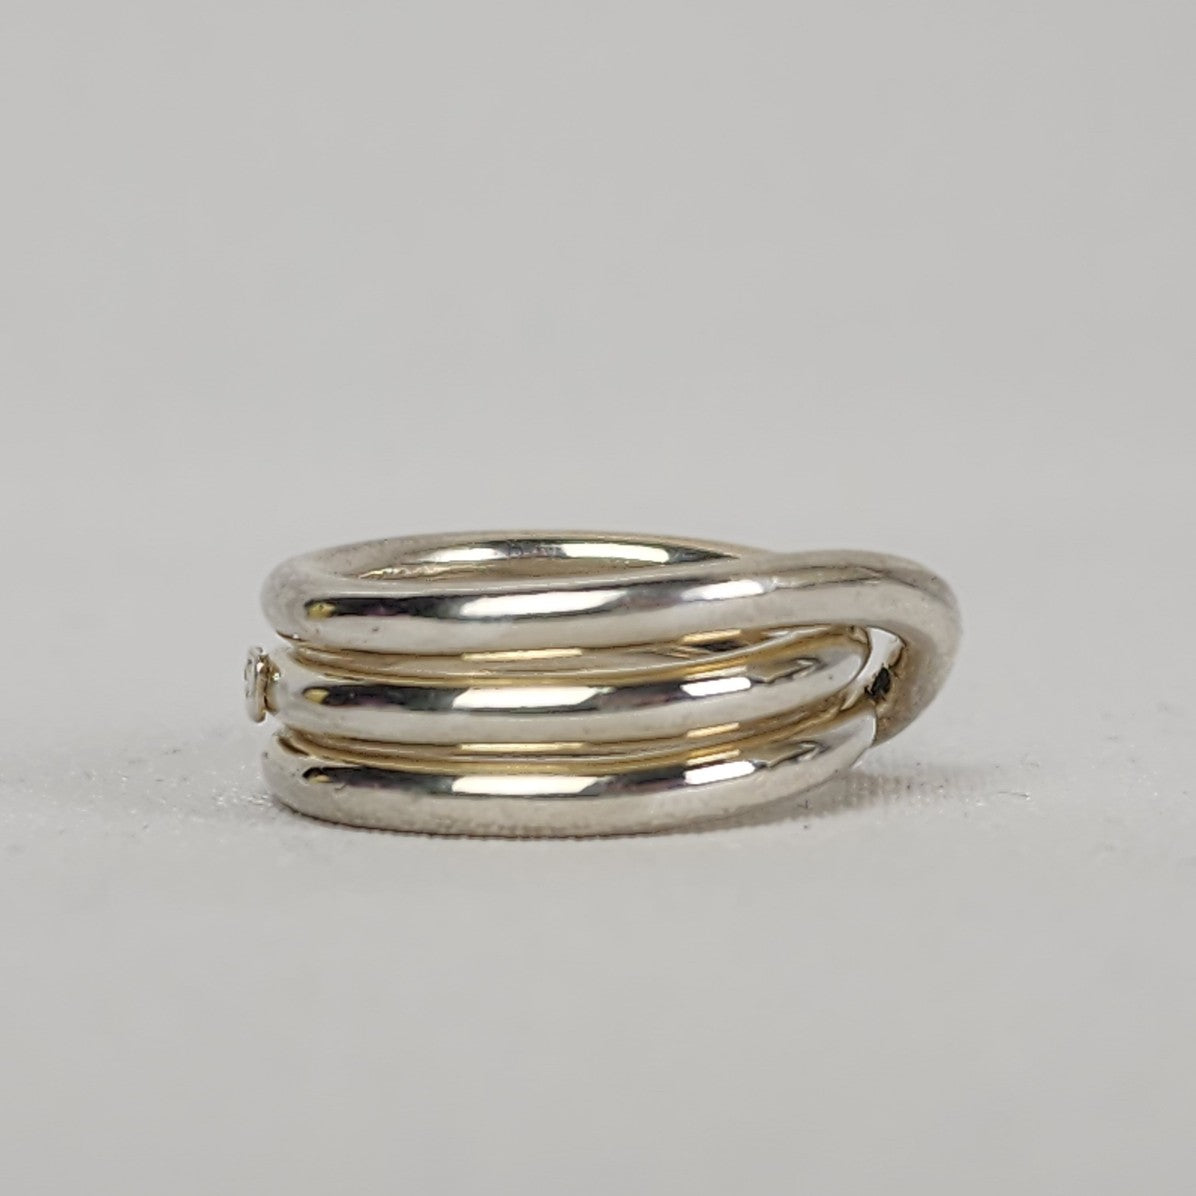 A&C Sterling Silver Stacked Ring Size 7.5